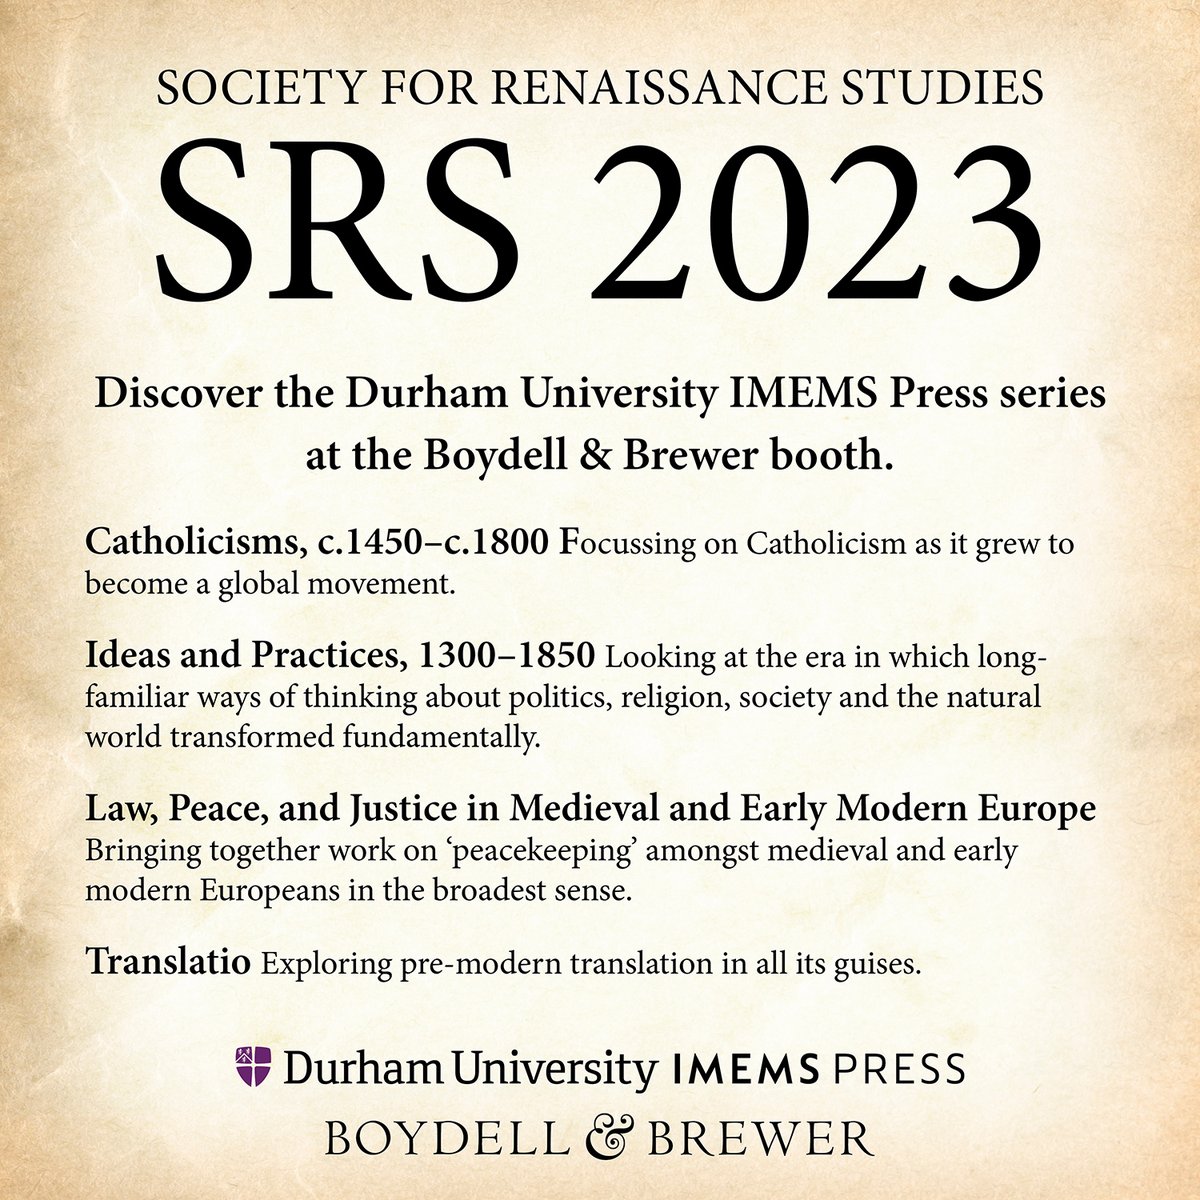 Discover the Durham University IMEMS series during #RenSoc23!  Commissioning Editor Elizabeth McDonald welcomes questions about how to publish with these exciting new series.
Visit @IMEMSDurham online for more details: boybrew.co/3rzkzd5
@SRSRenSoc @DrPastonsRUs